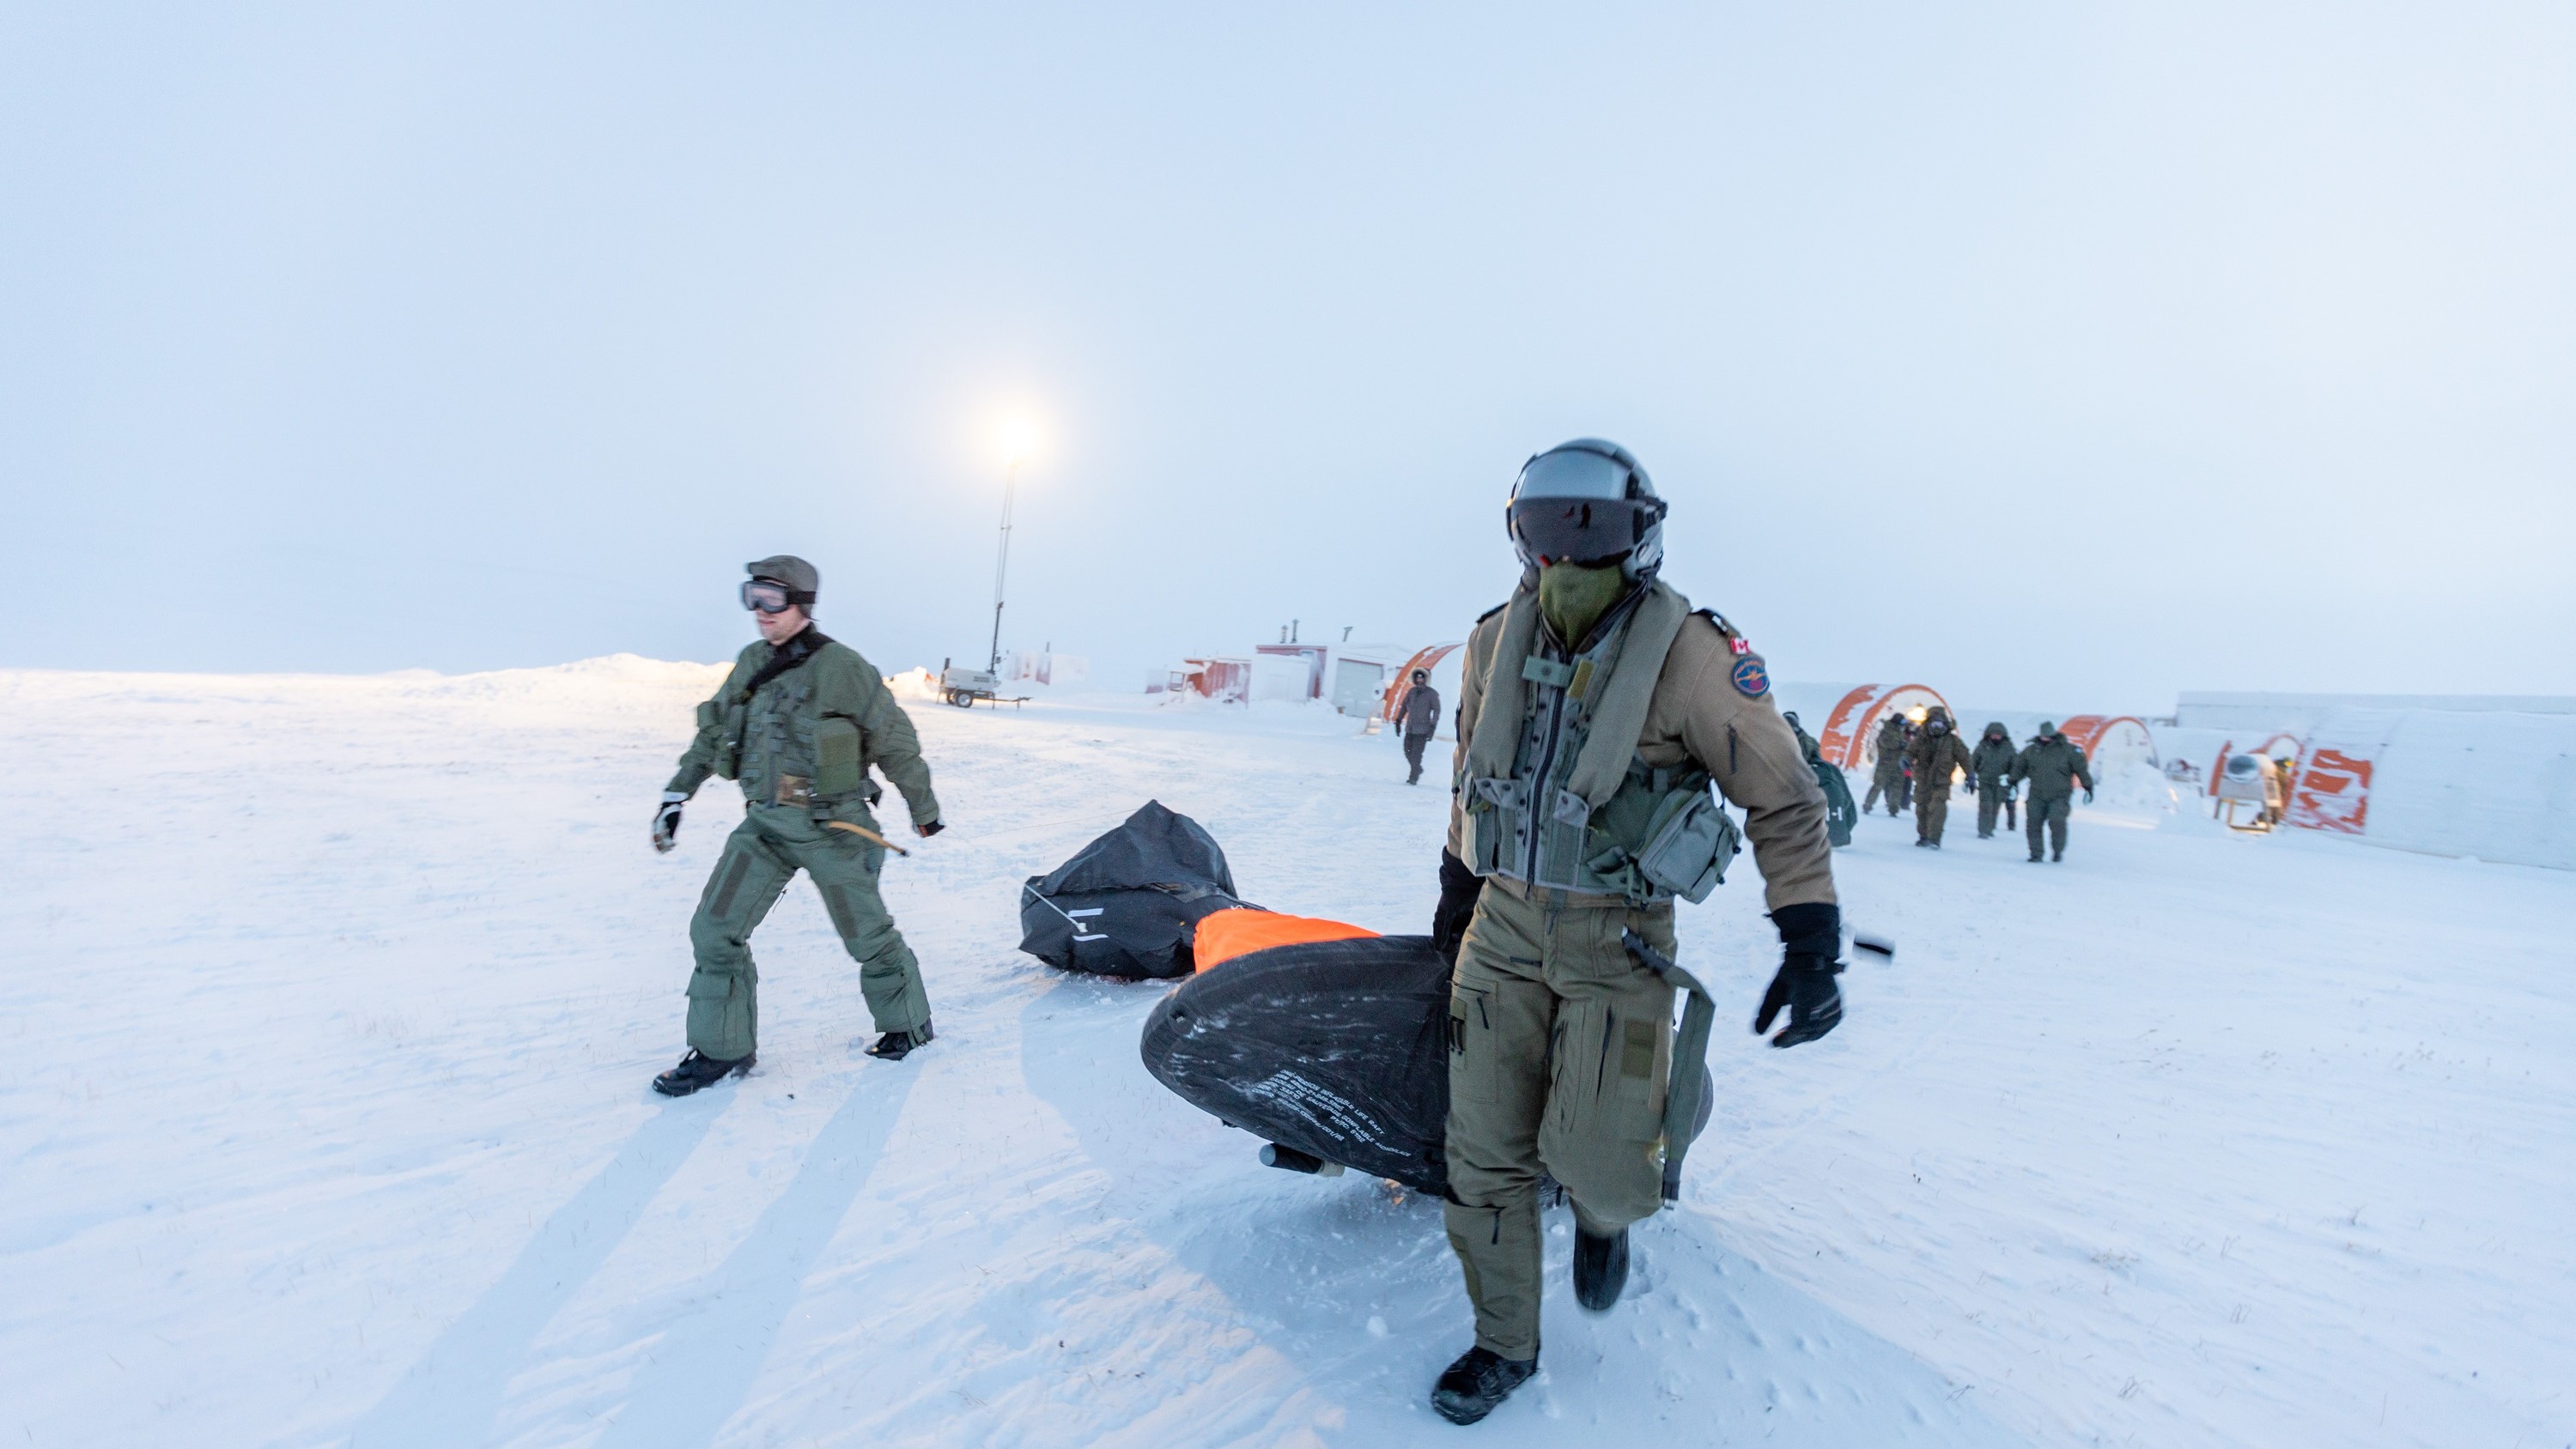 DRDC tests Arctic survival kits for military aircraft with Allies